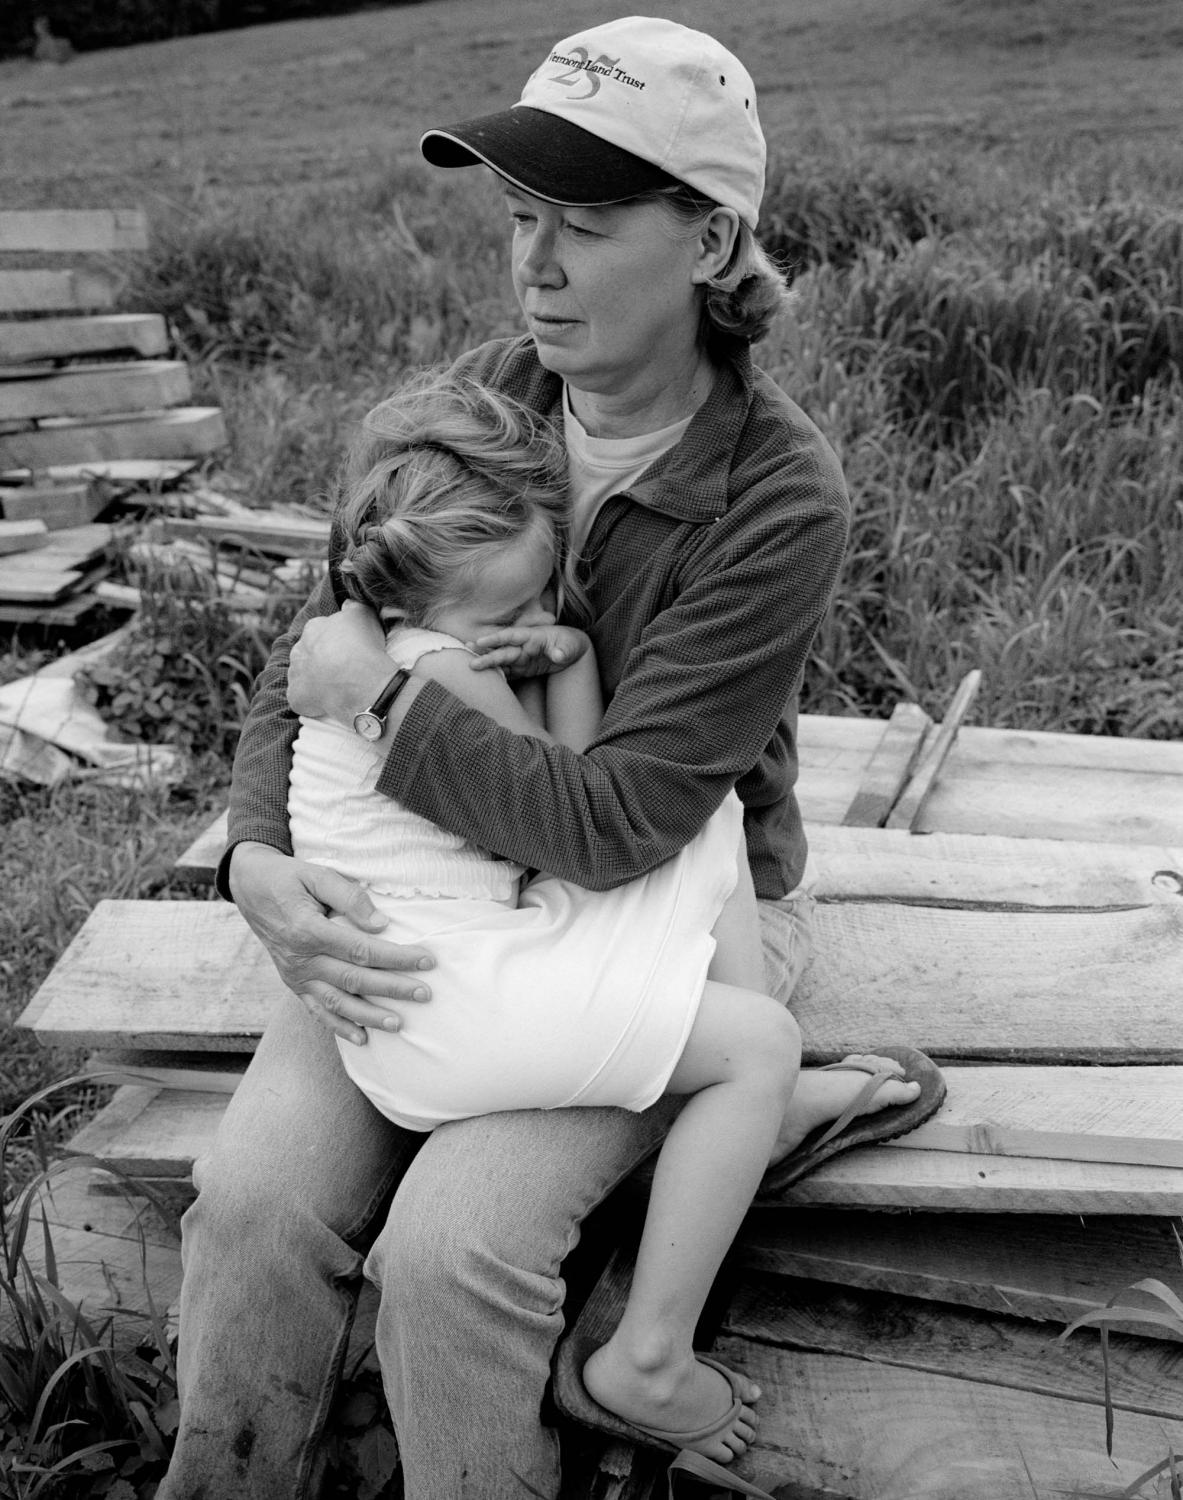 The Other Farm - Beverley Thurber, second generation farmer, and her...